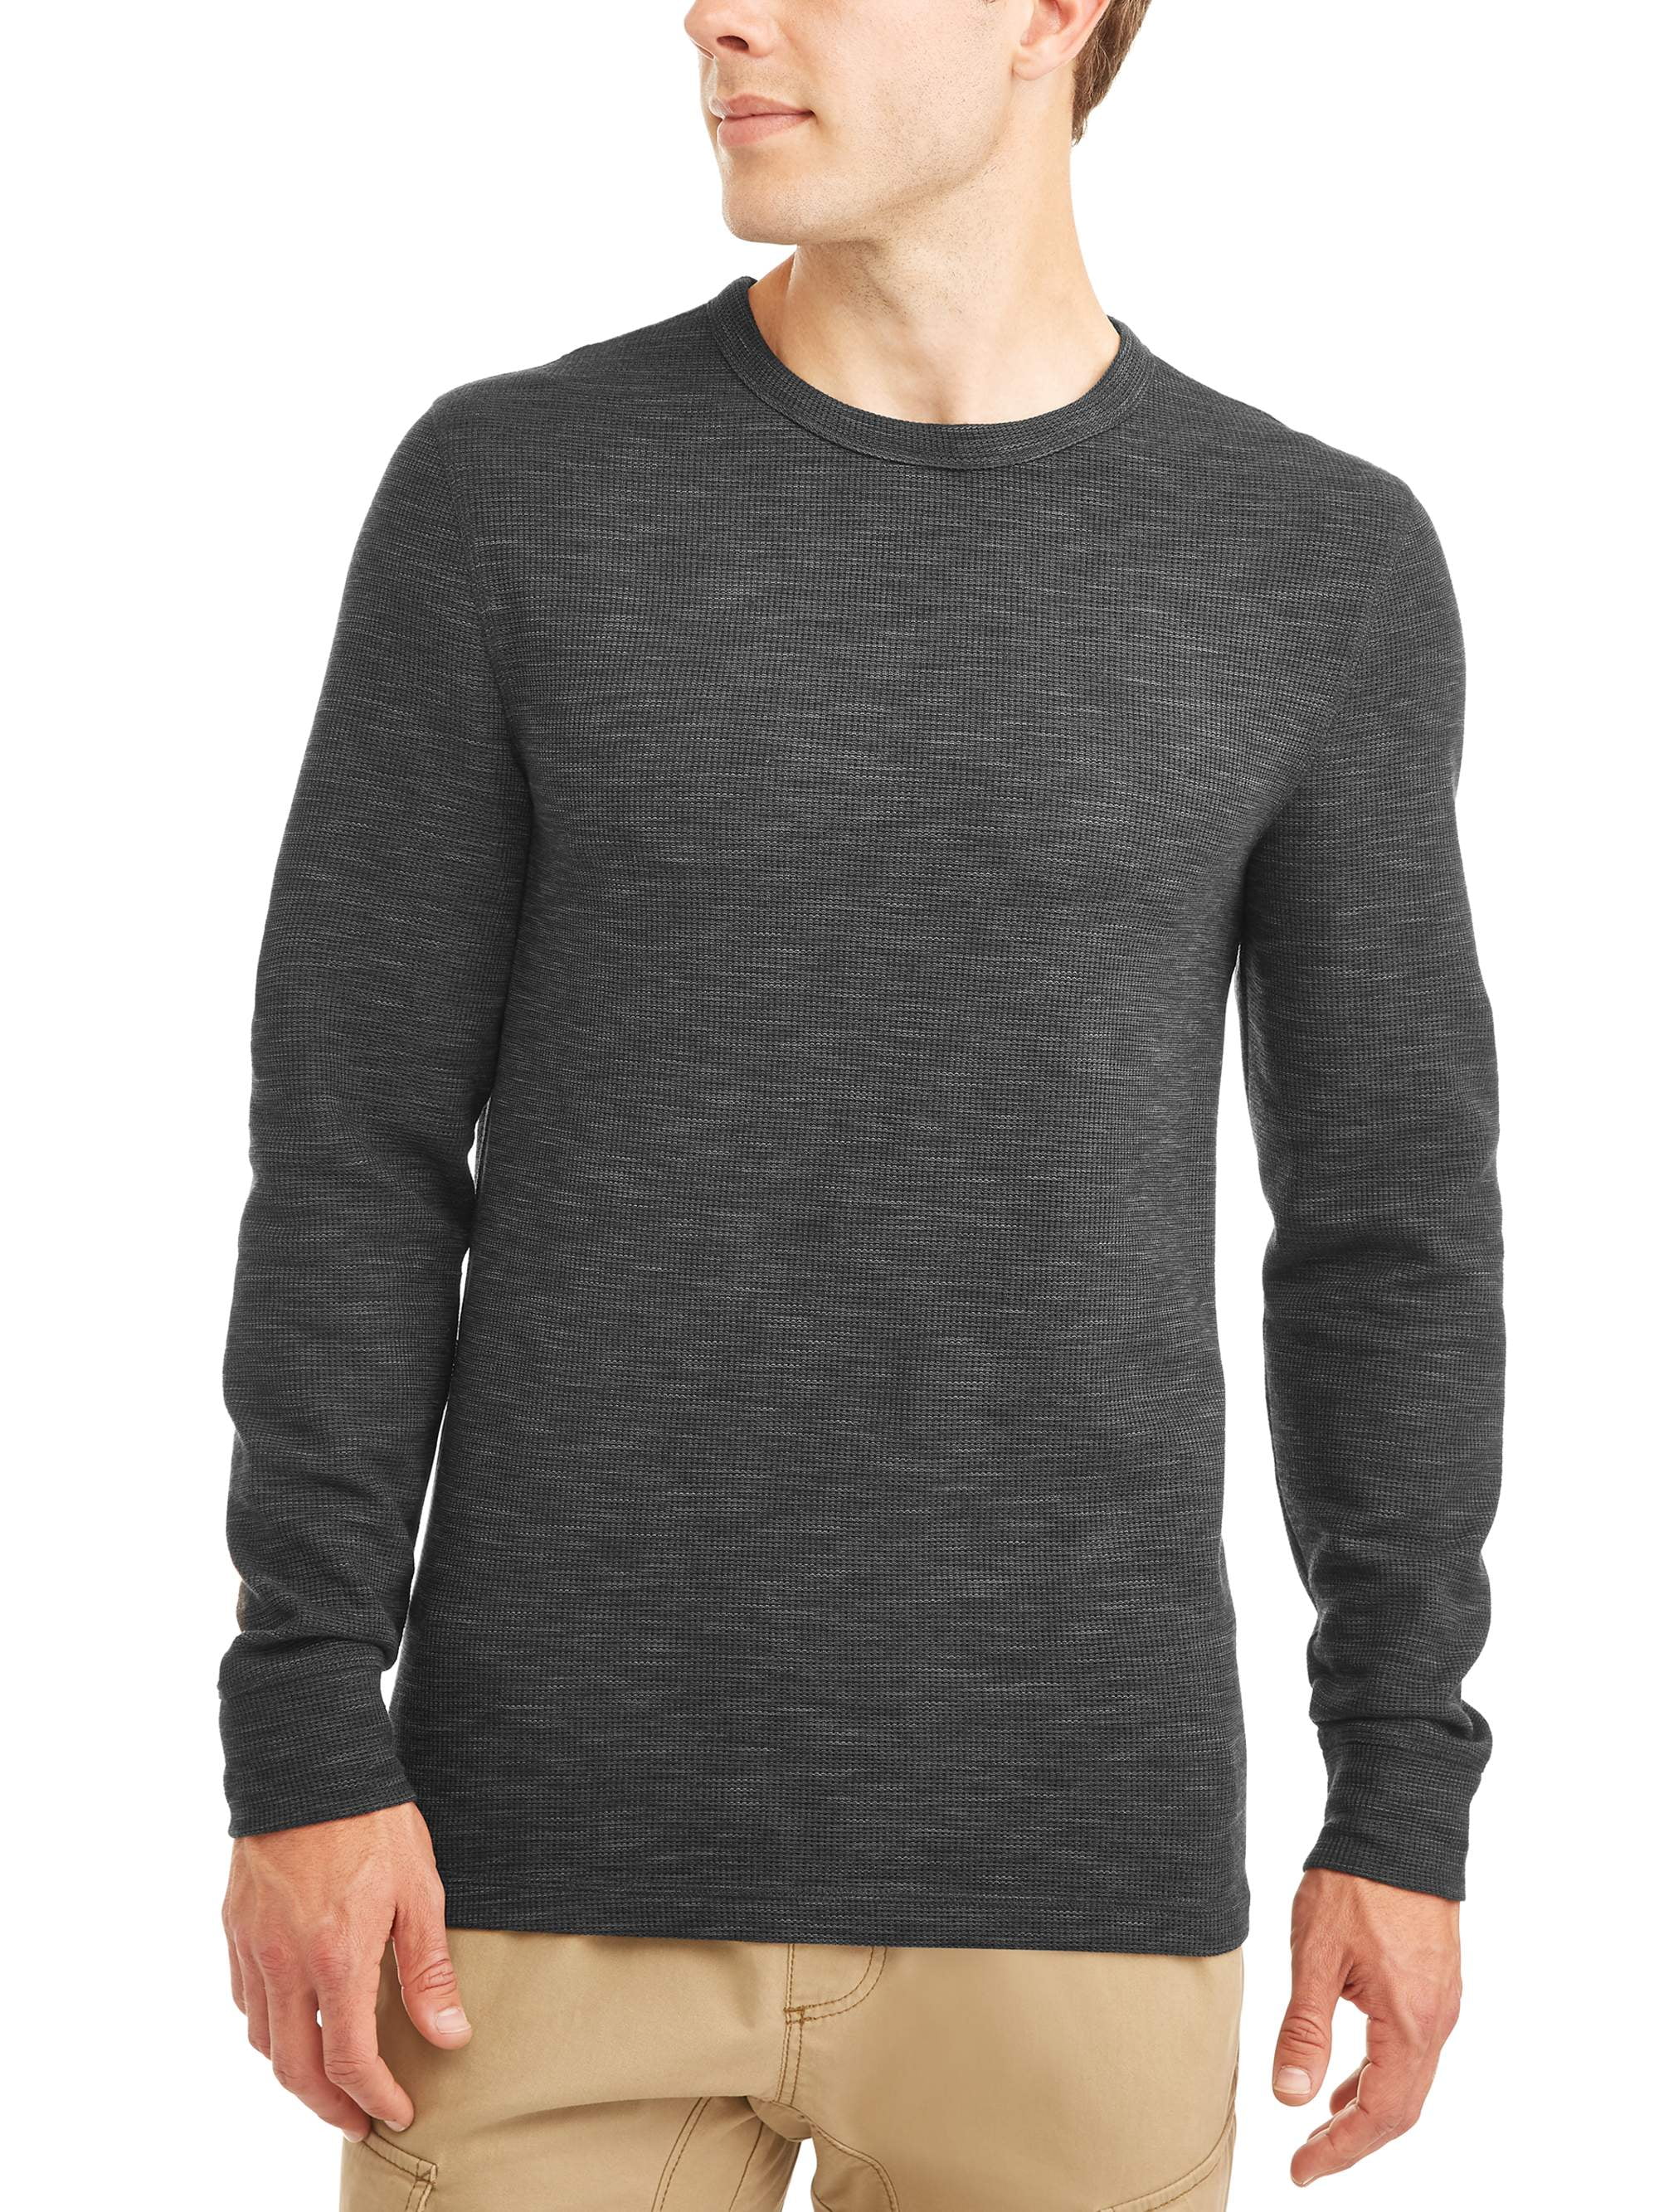 George Men's Long Sleeve Thermal Crew, up to size 5XL - Walmart.com